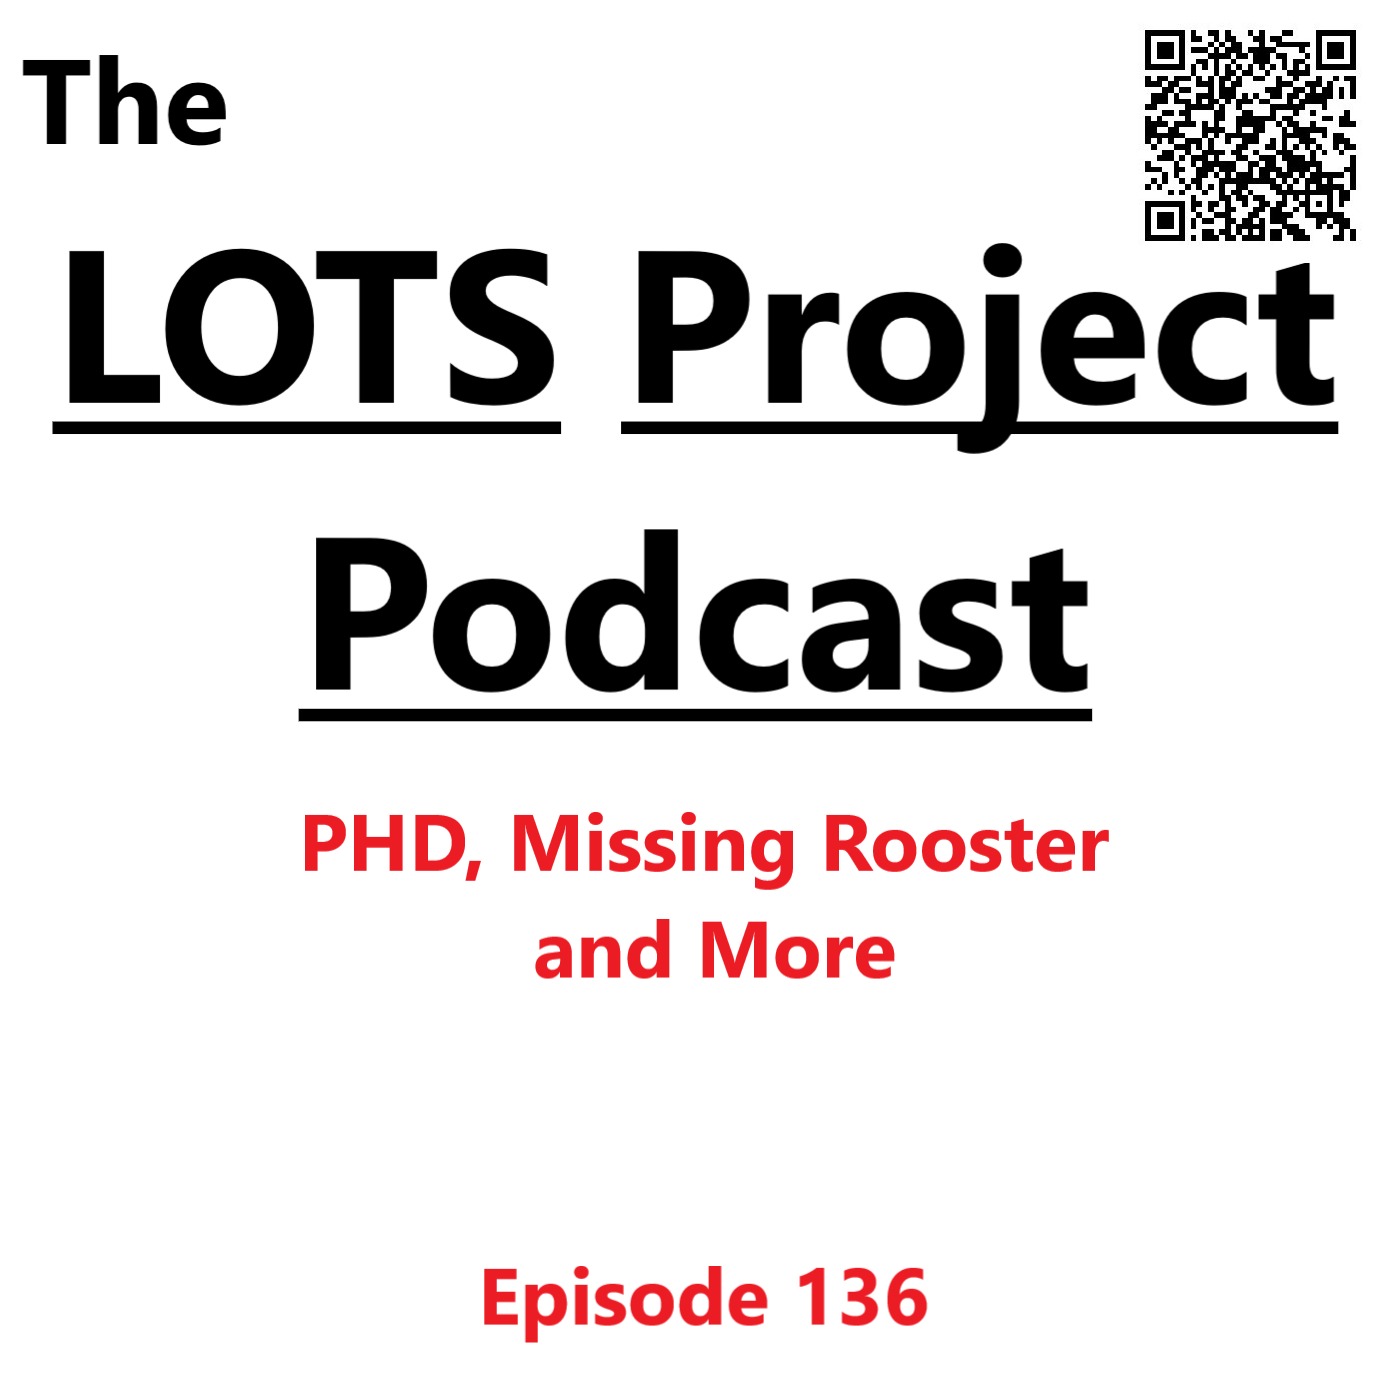 PHD, Missing Rooster and More